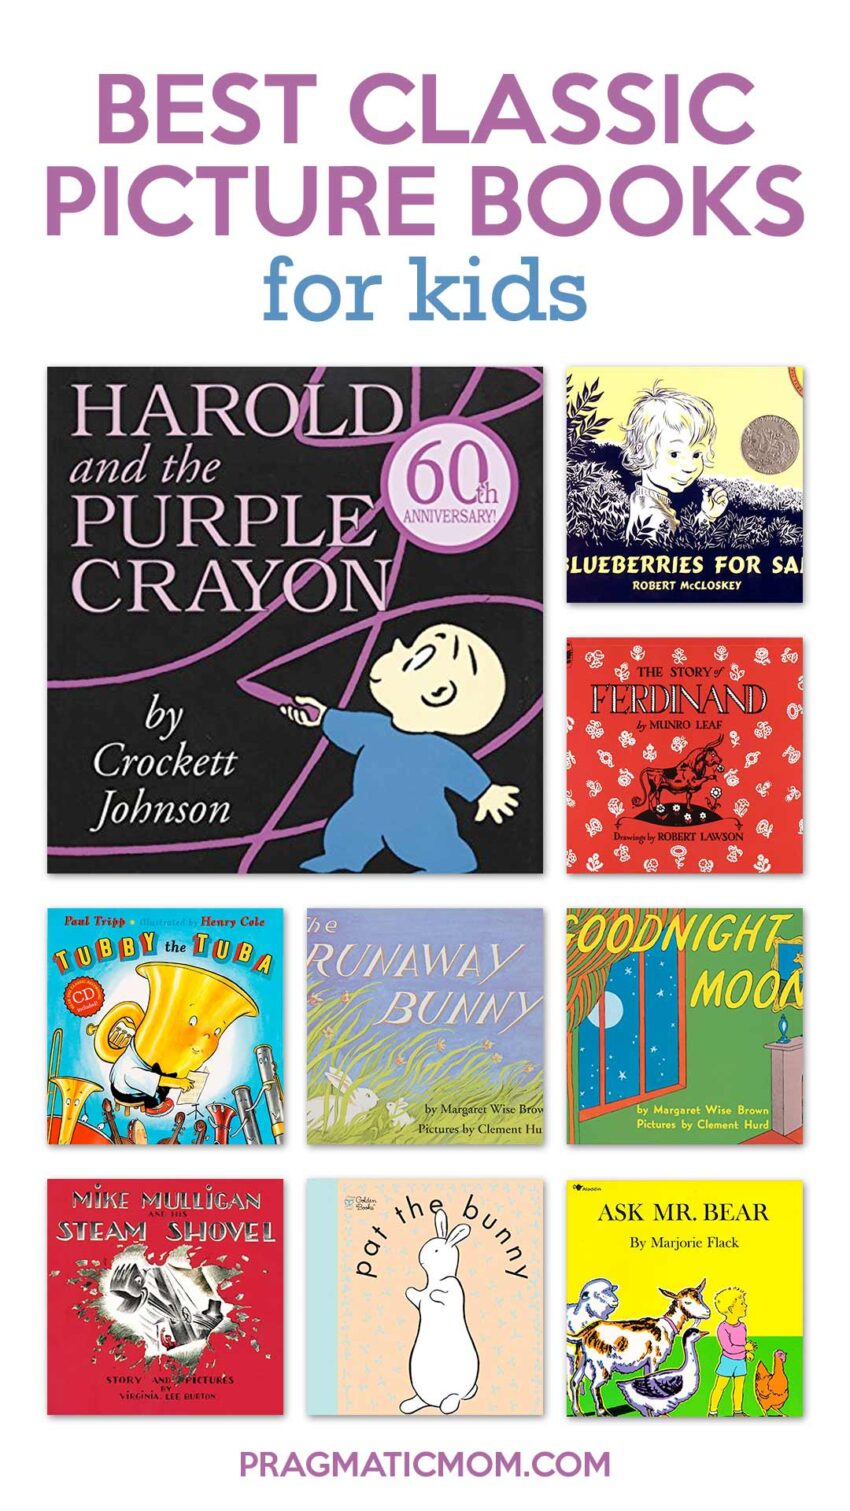 Best Classic Picture Books for Kids